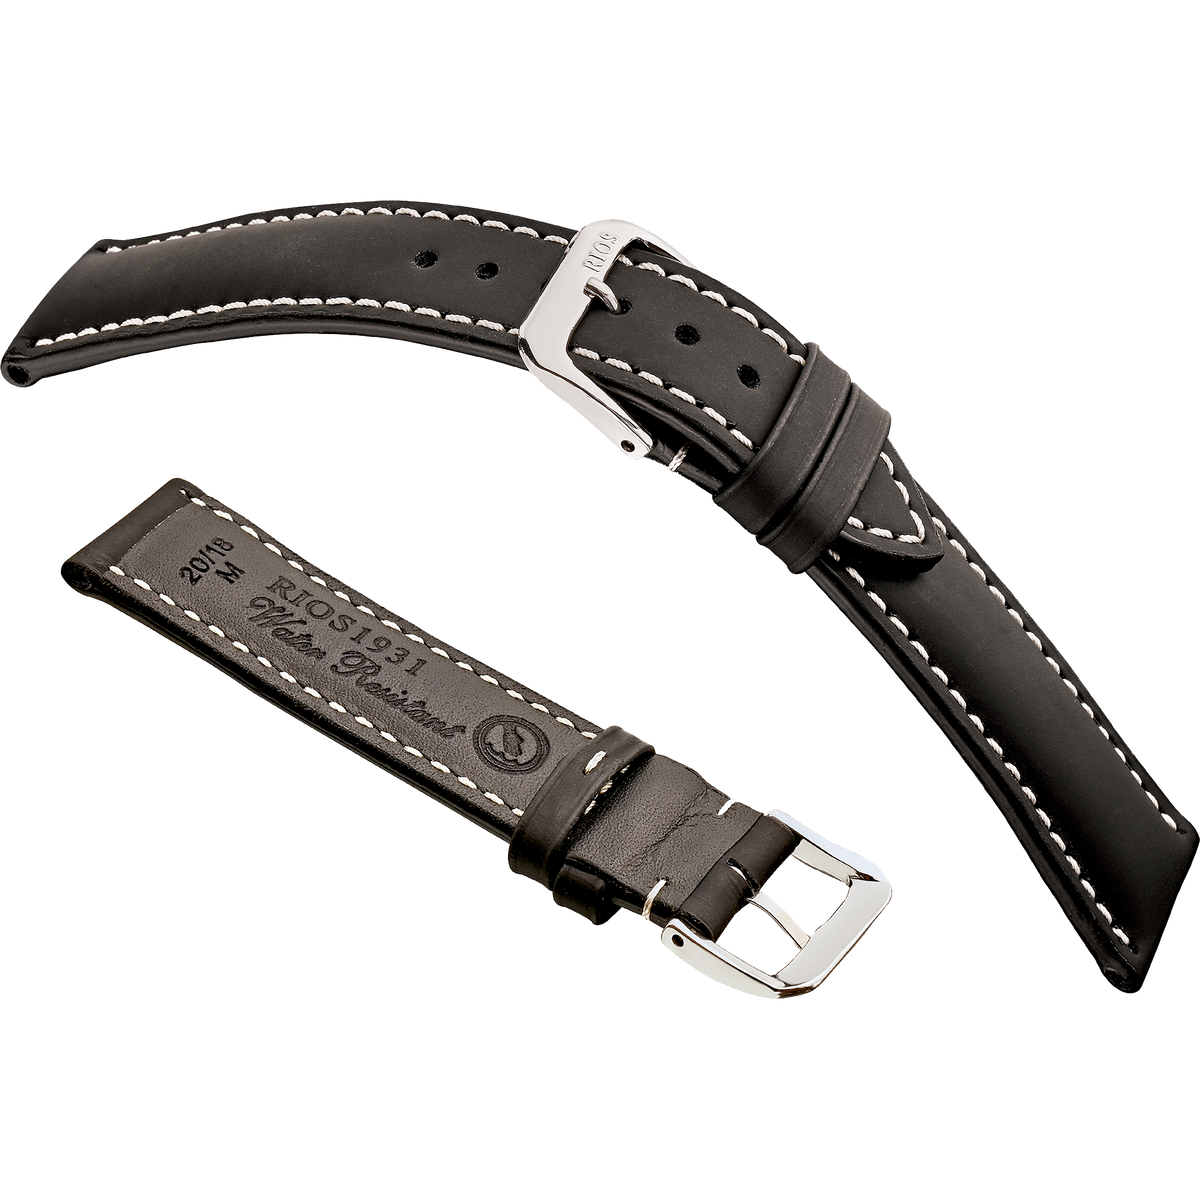 Rios 1931 Watch Bands - POLO - Genuine Cowhide with rubber grip